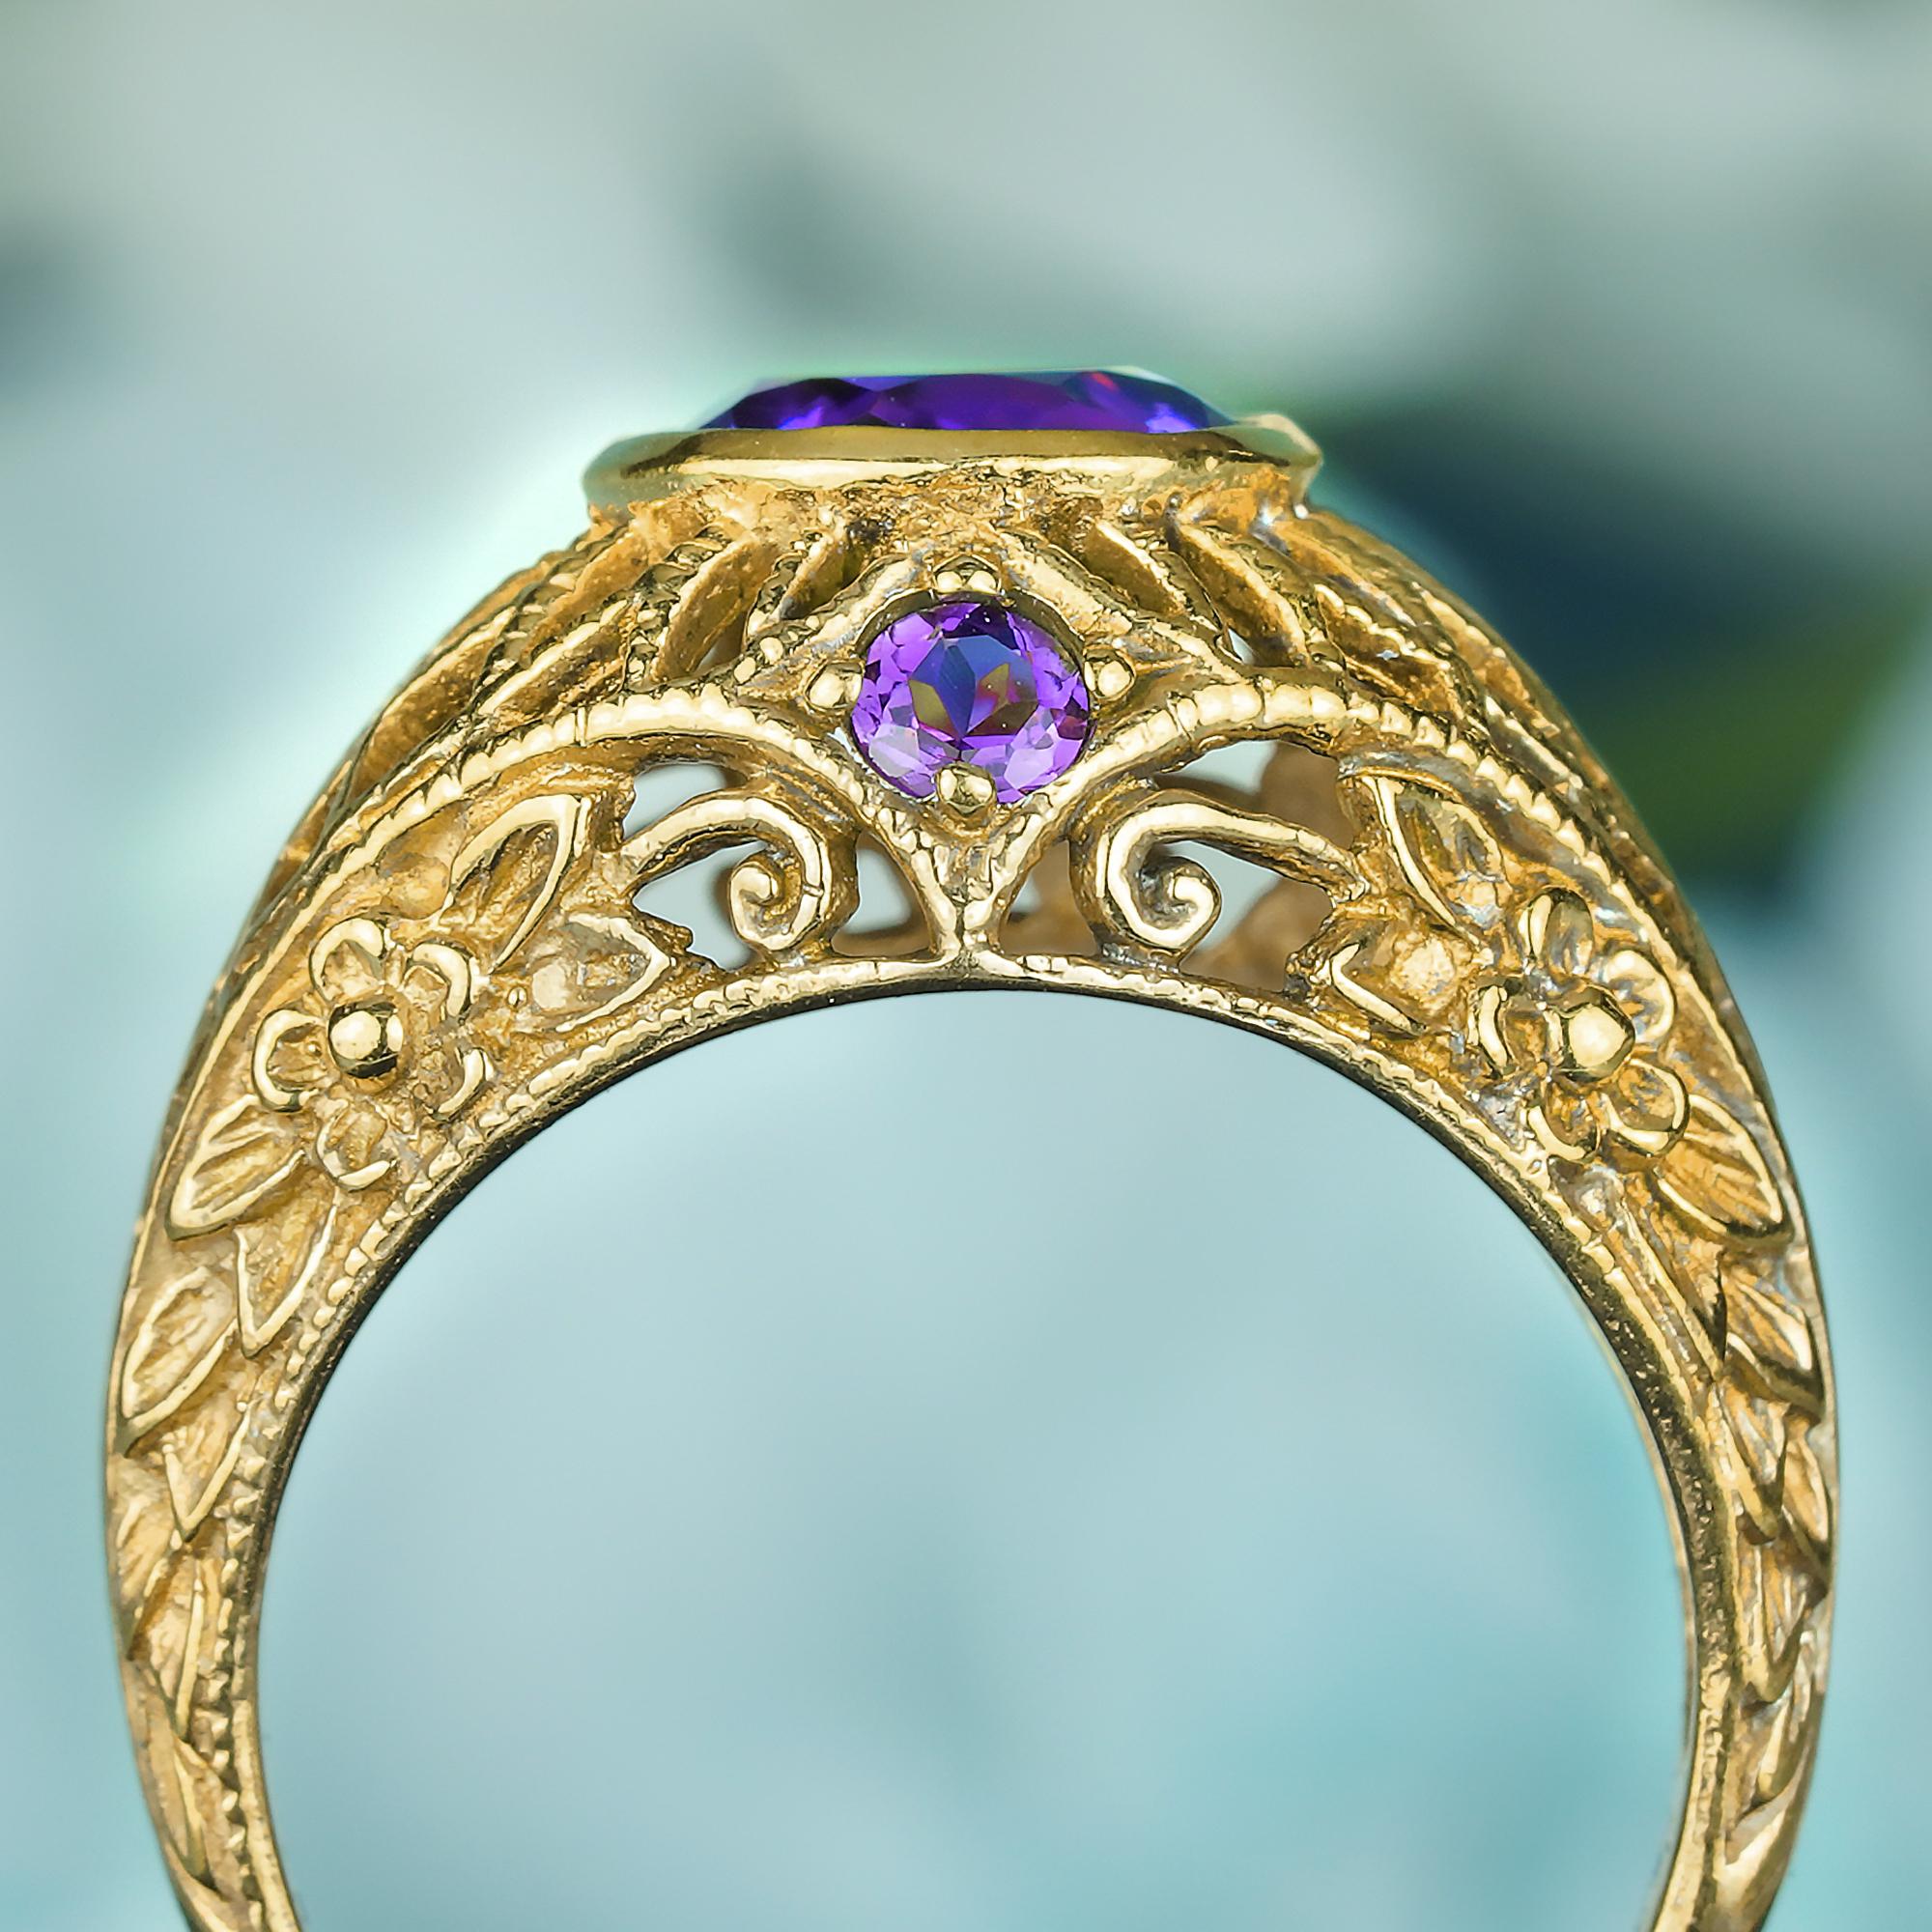 For Sale:  Natural Amethyst Vintage Style Filigree Net Ring in Solid 9K Yellow Gold 5